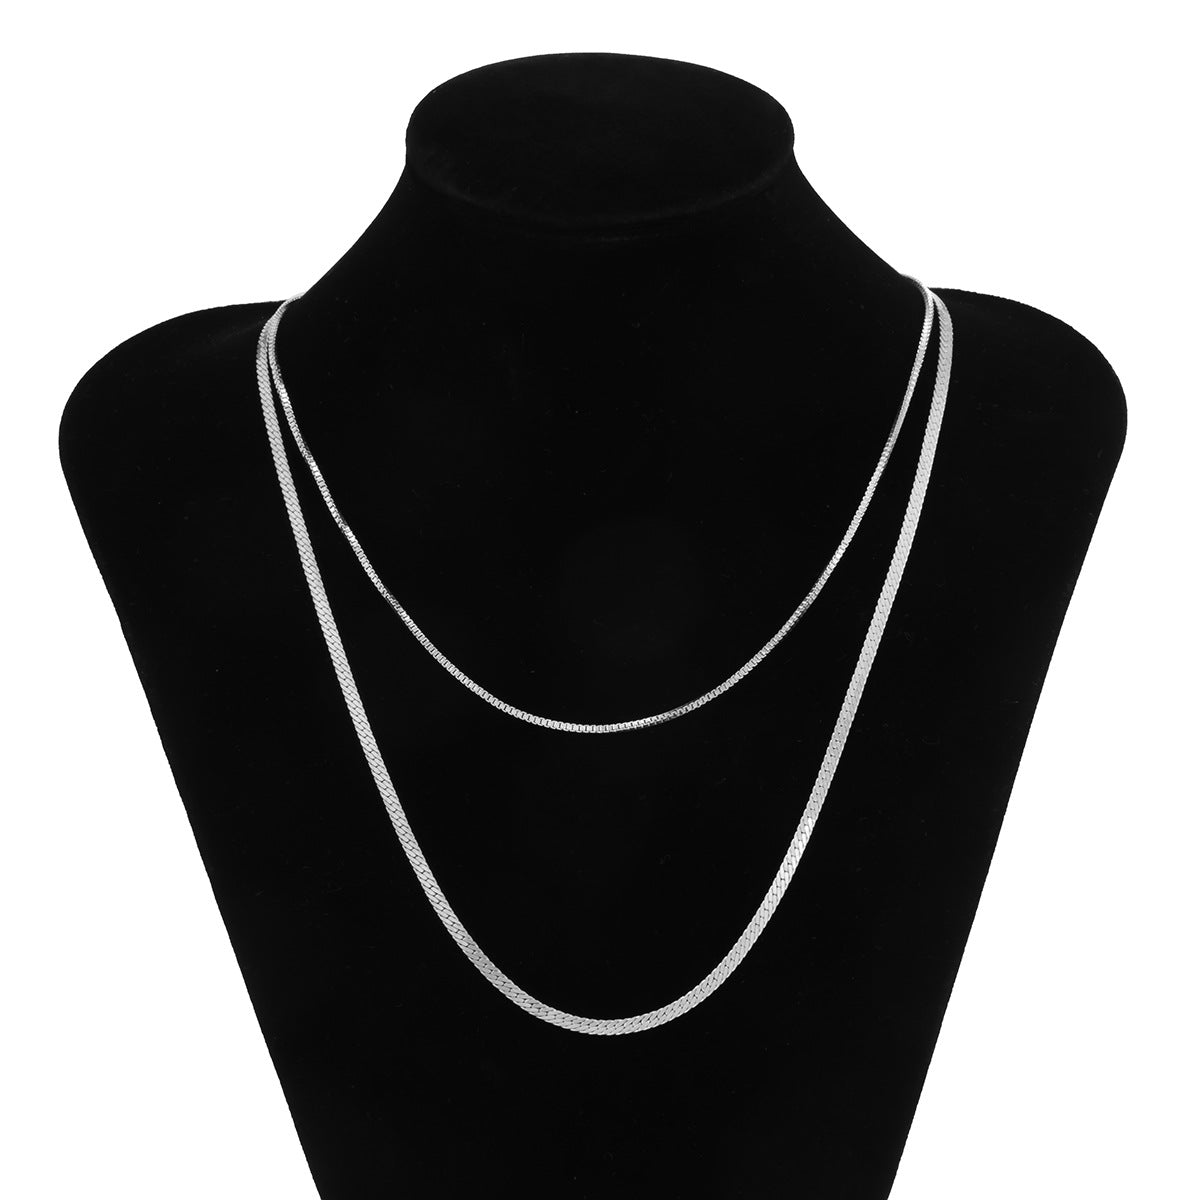 Fashionable simple double-layer flat snake chain design punk style all-match necklace